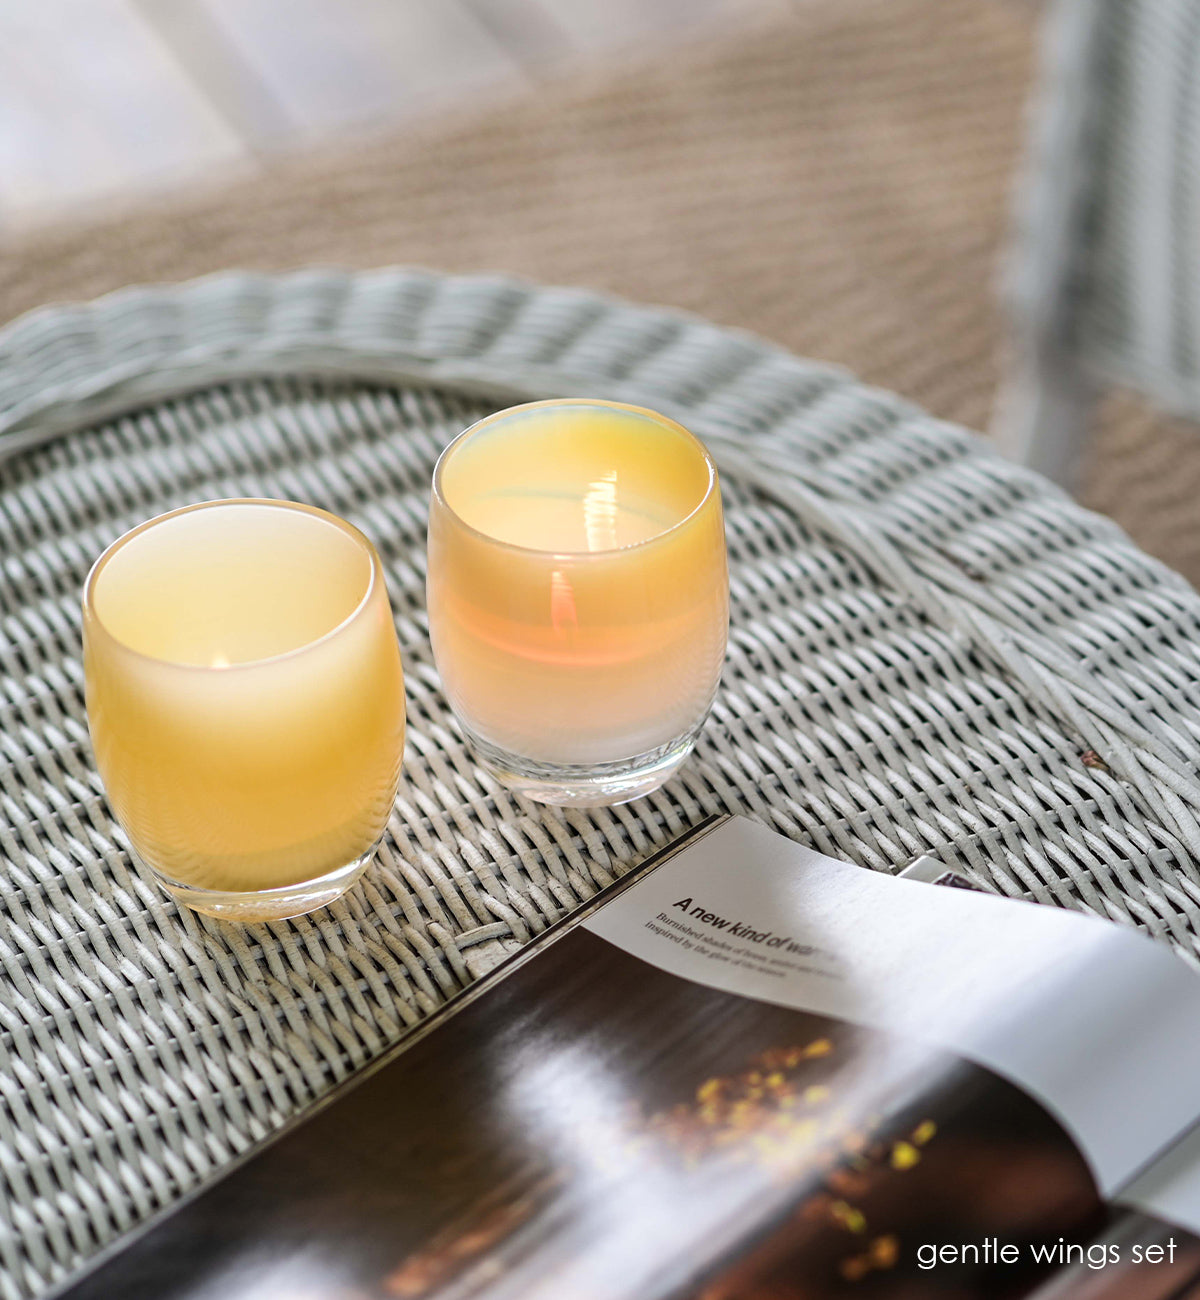 gentle wings set, angel and comfort hand-blown pale yellow set of two, hand-blown glass votive candle holders.